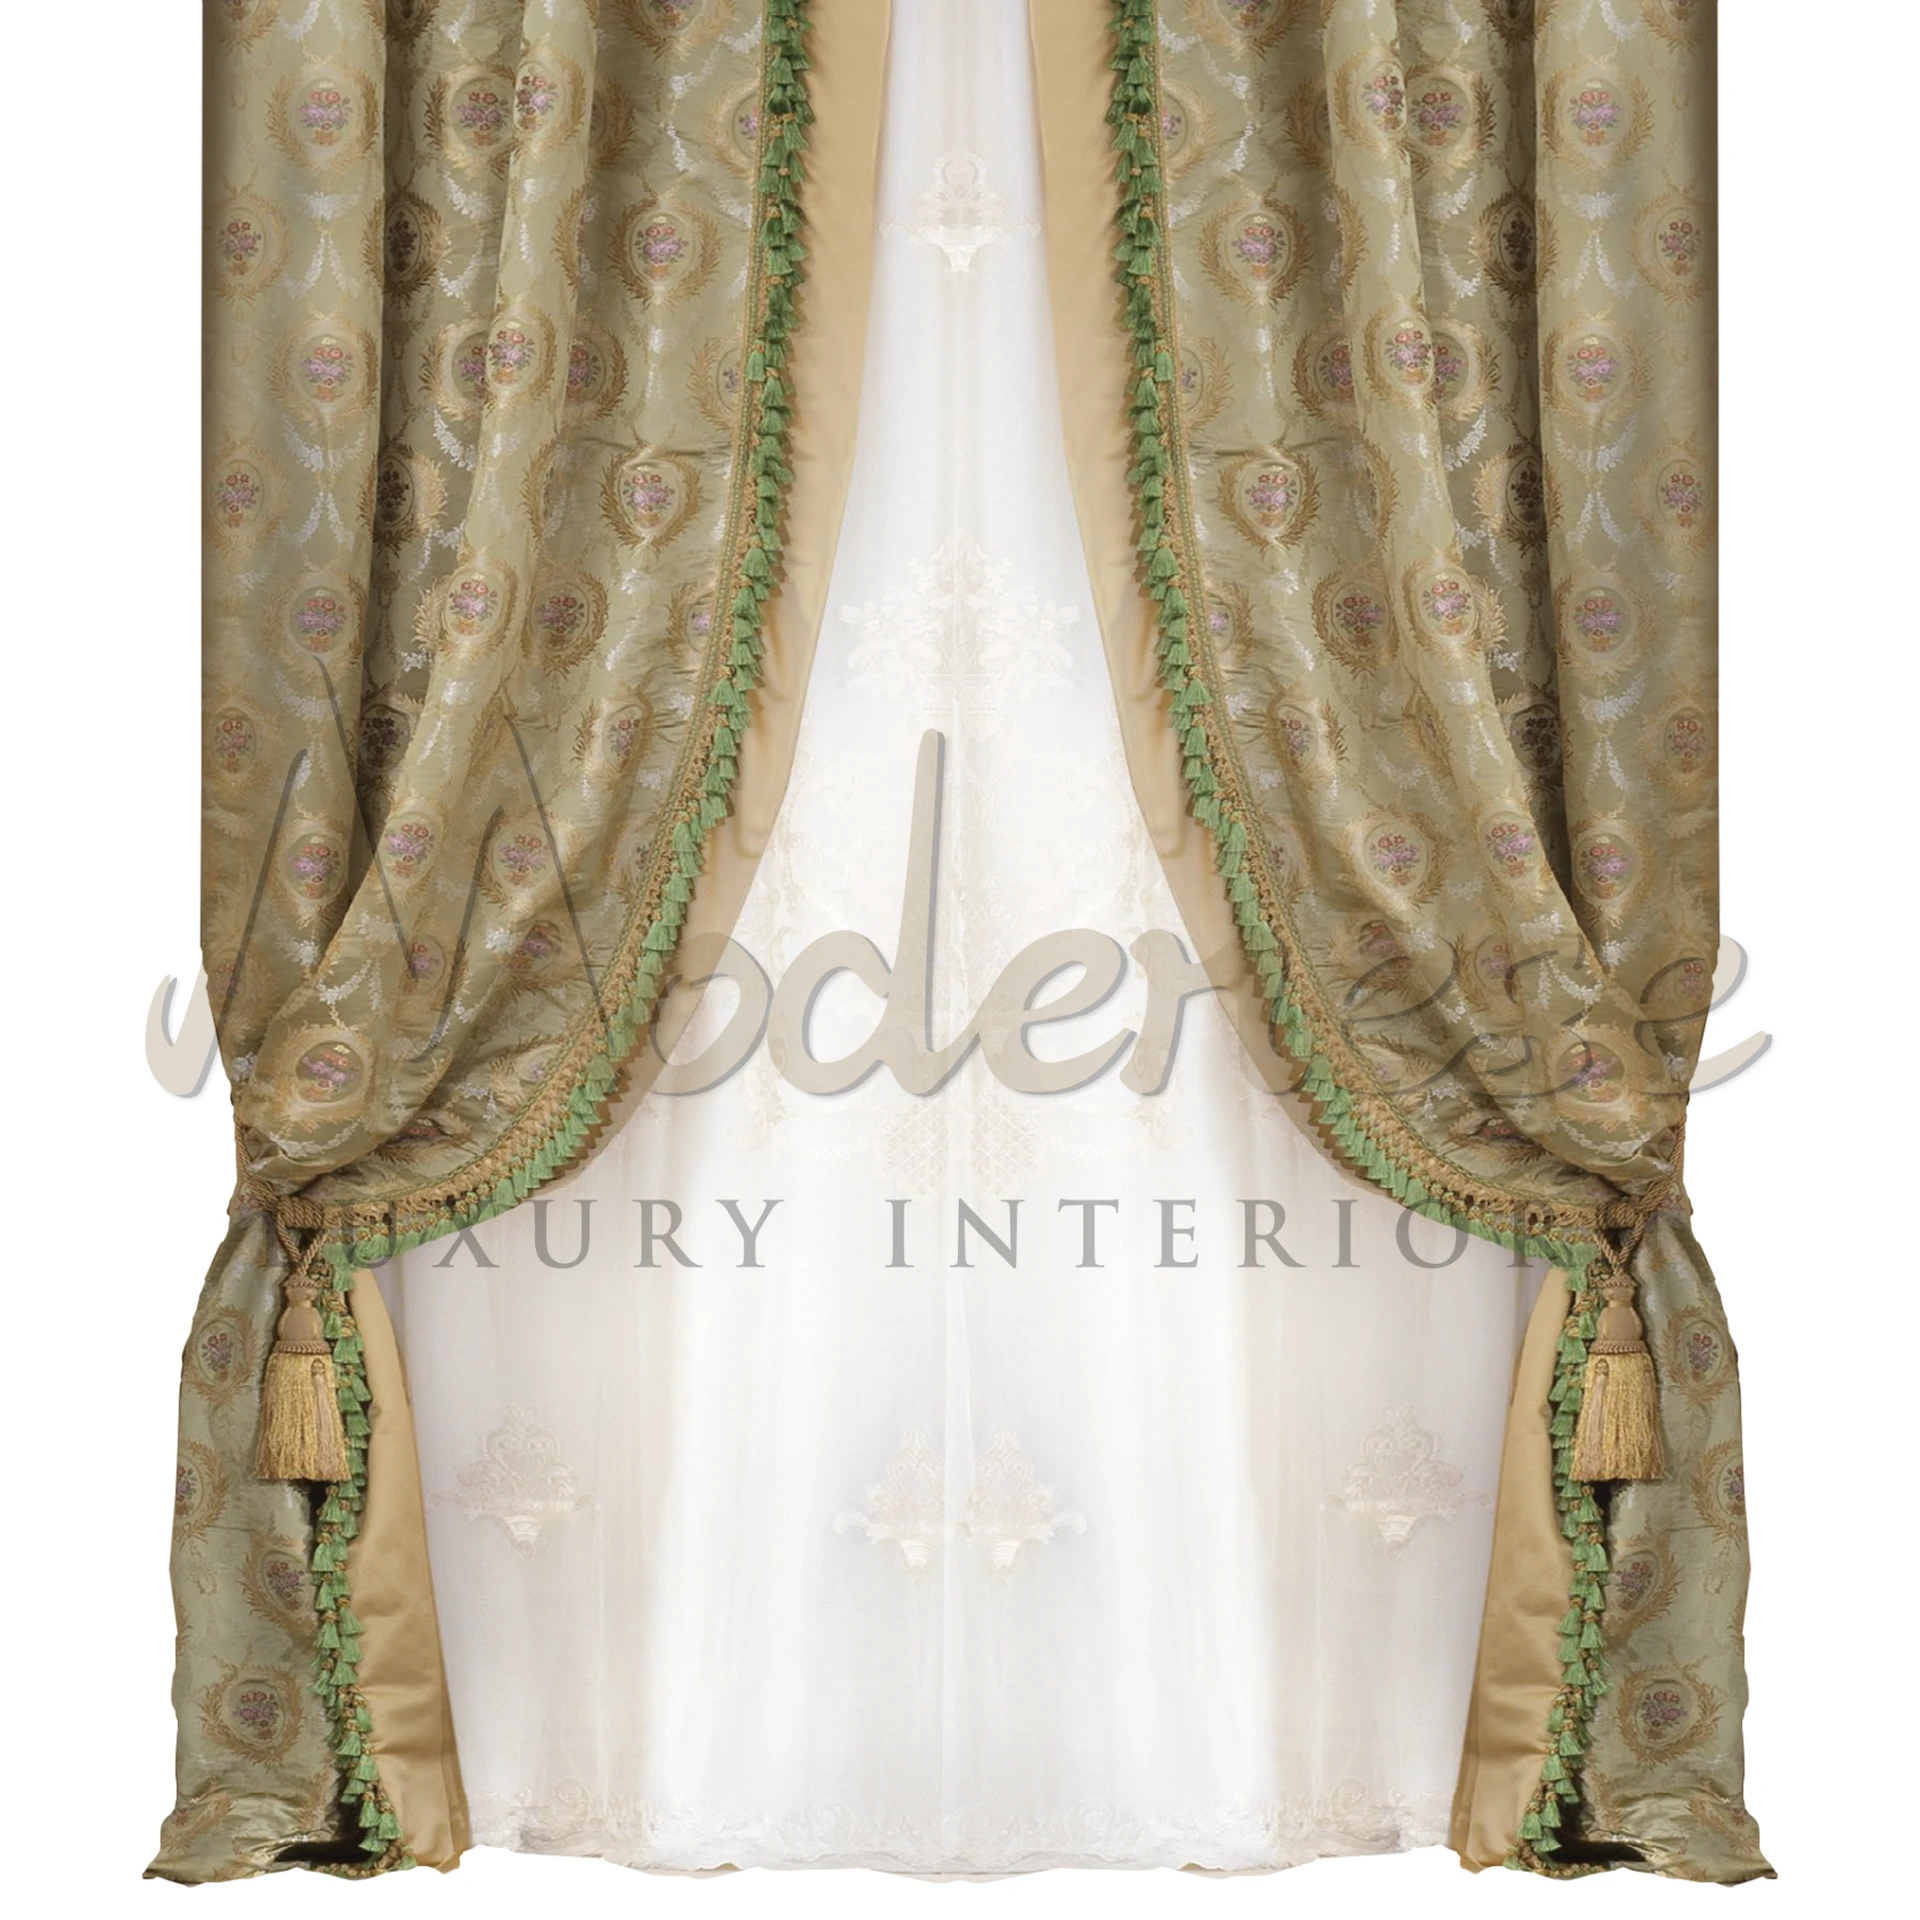 Traditional Pattern Silk Curtains with delicate damask motifs, showcasing timeless elegance and intricate craftsmanship.